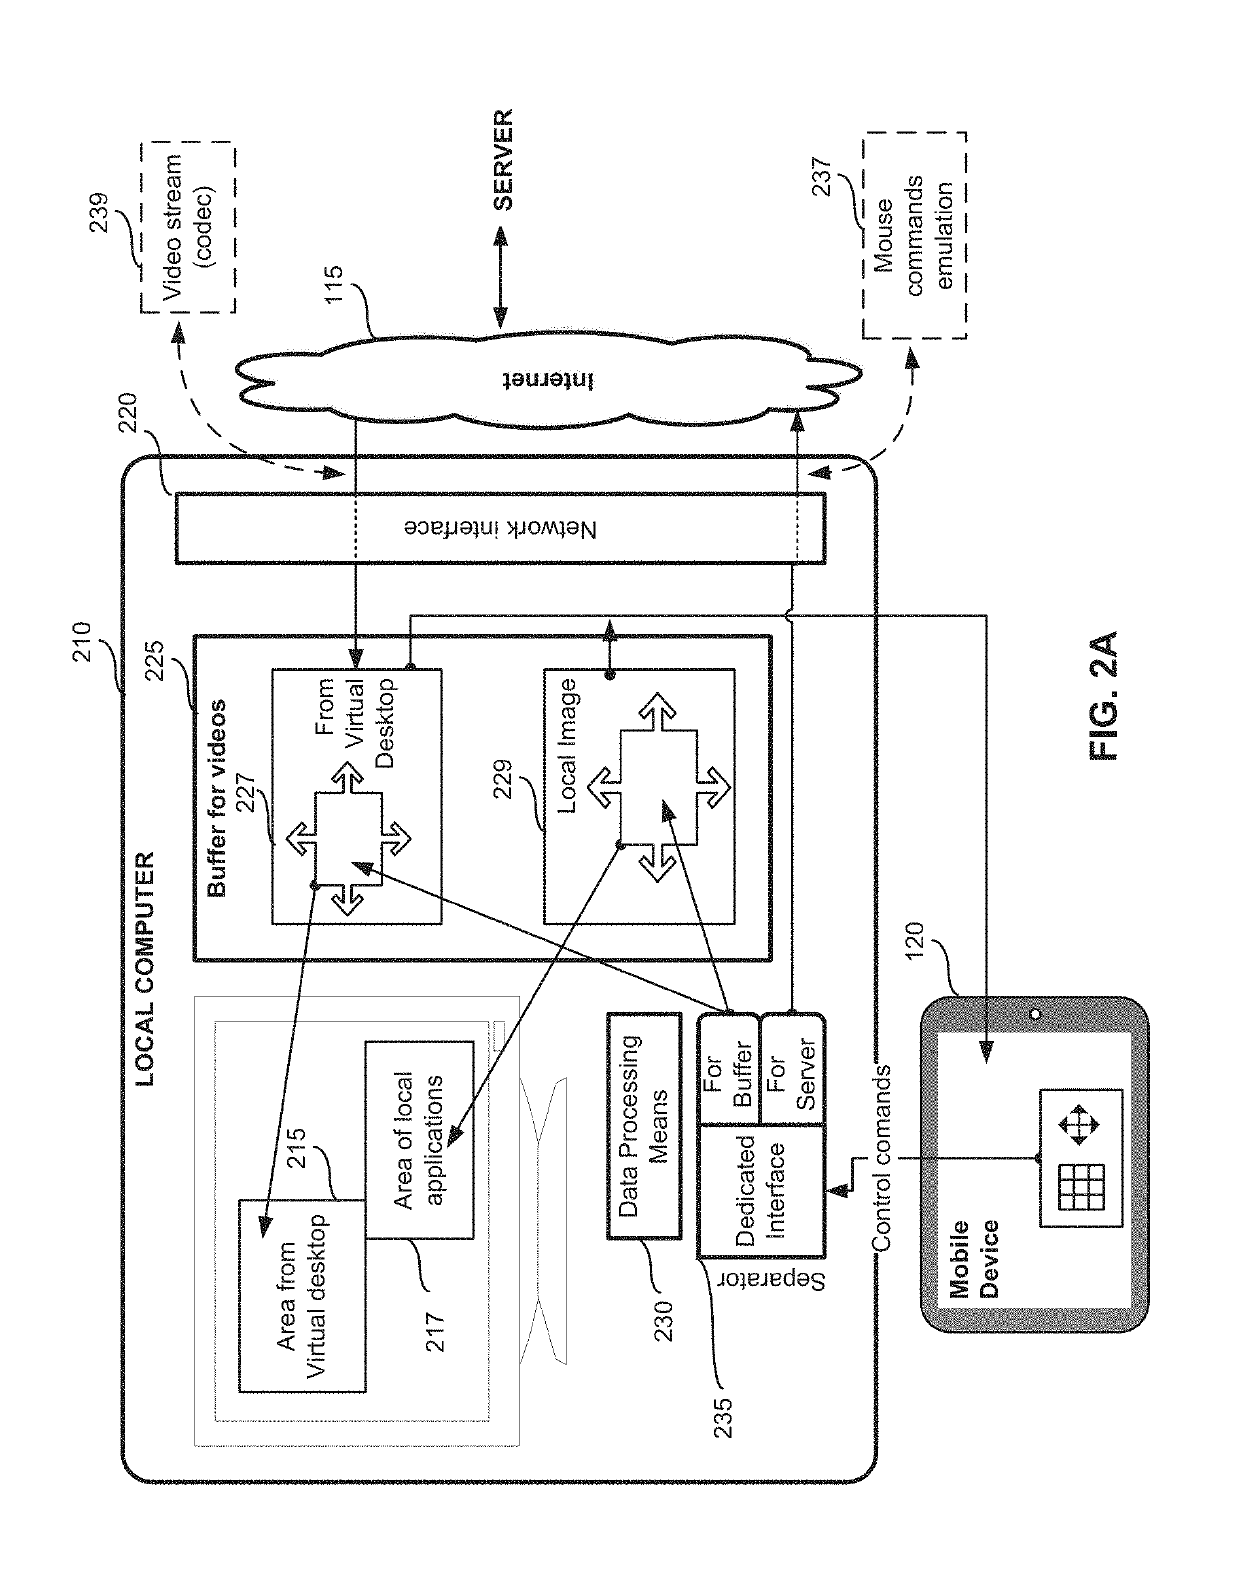 Method and system for controlling local display and remote virtual desktop from a mobile device